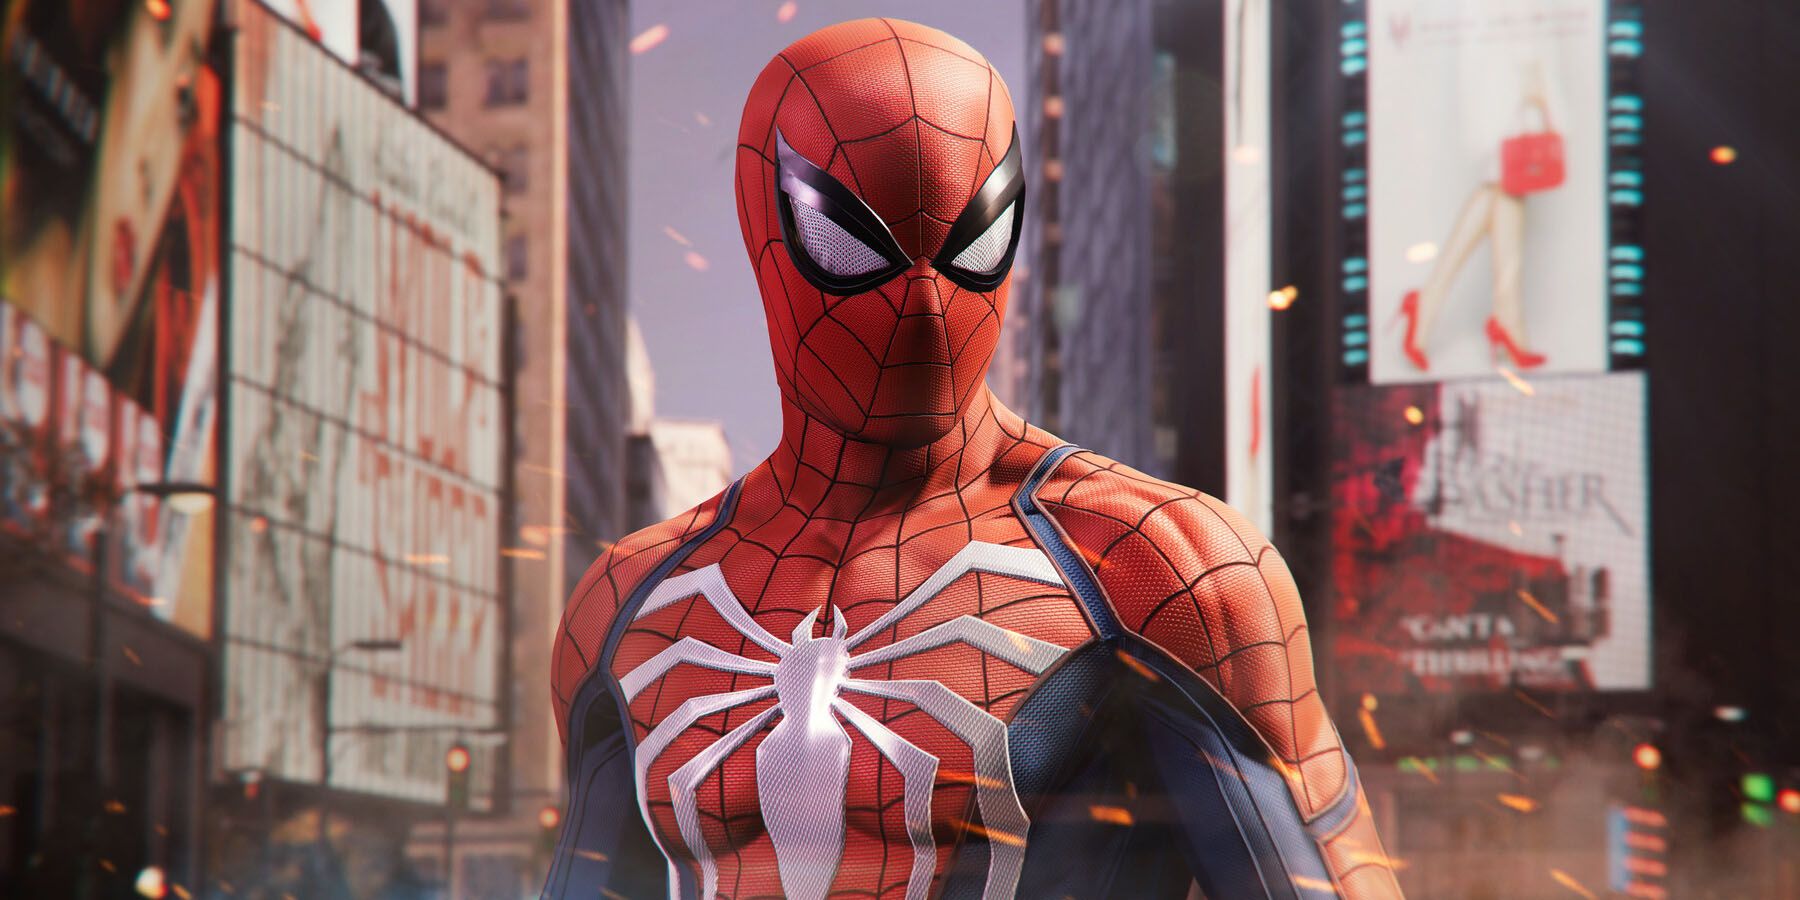 The Complete List of Spider-Man Games in Chronological & Release